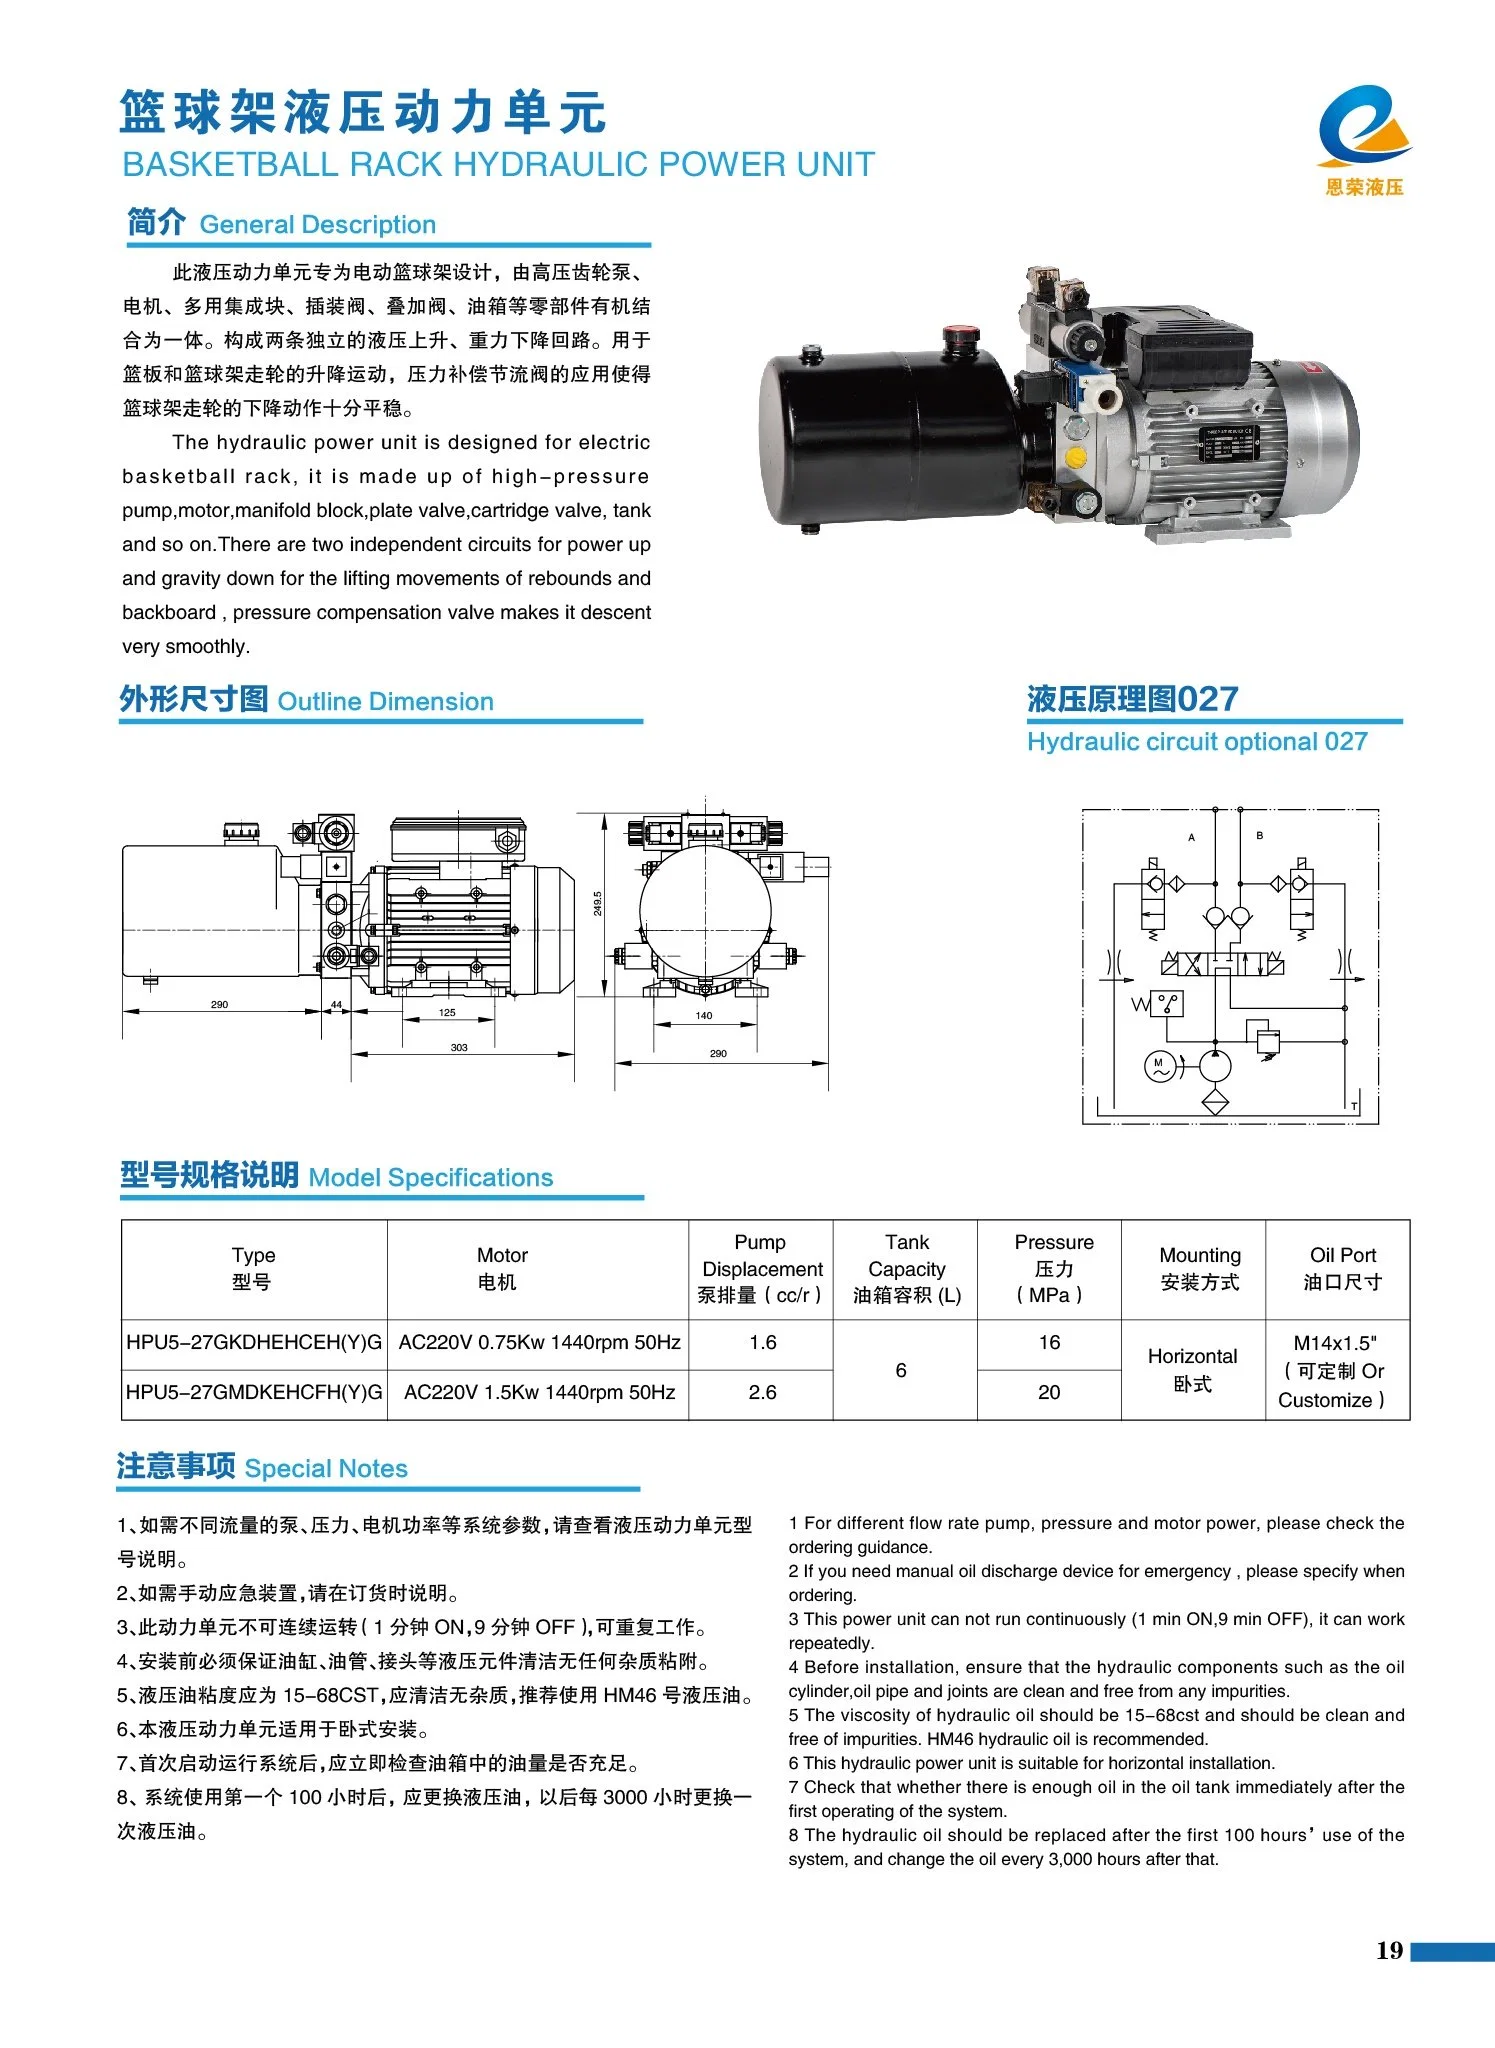 Made in China The Hydraulic Power Unit of Basketball Stand Can Be Operated by Electric Remote Control Valve Block Hydraulic Power Motor DC Powerpack